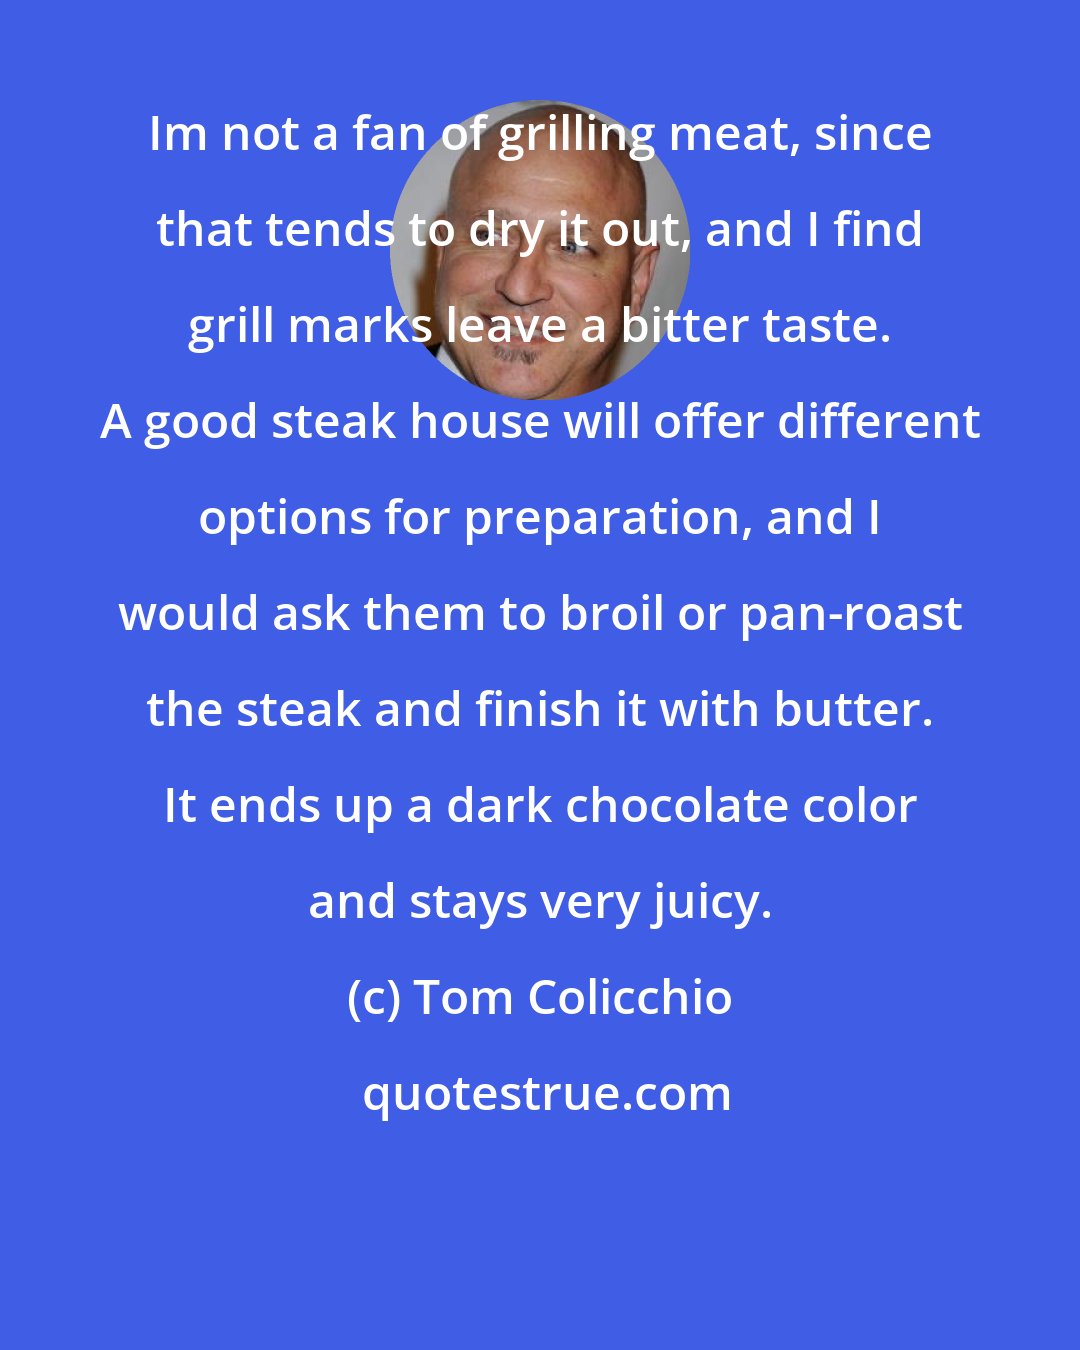 Tom Colicchio: Im not a fan of grilling meat, since that tends to dry it out, and I find grill marks leave a bitter taste. A good steak house will offer different options for preparation, and I would ask them to broil or pan-roast the steak and finish it with butter. It ends up a dark chocolate color and stays very juicy.